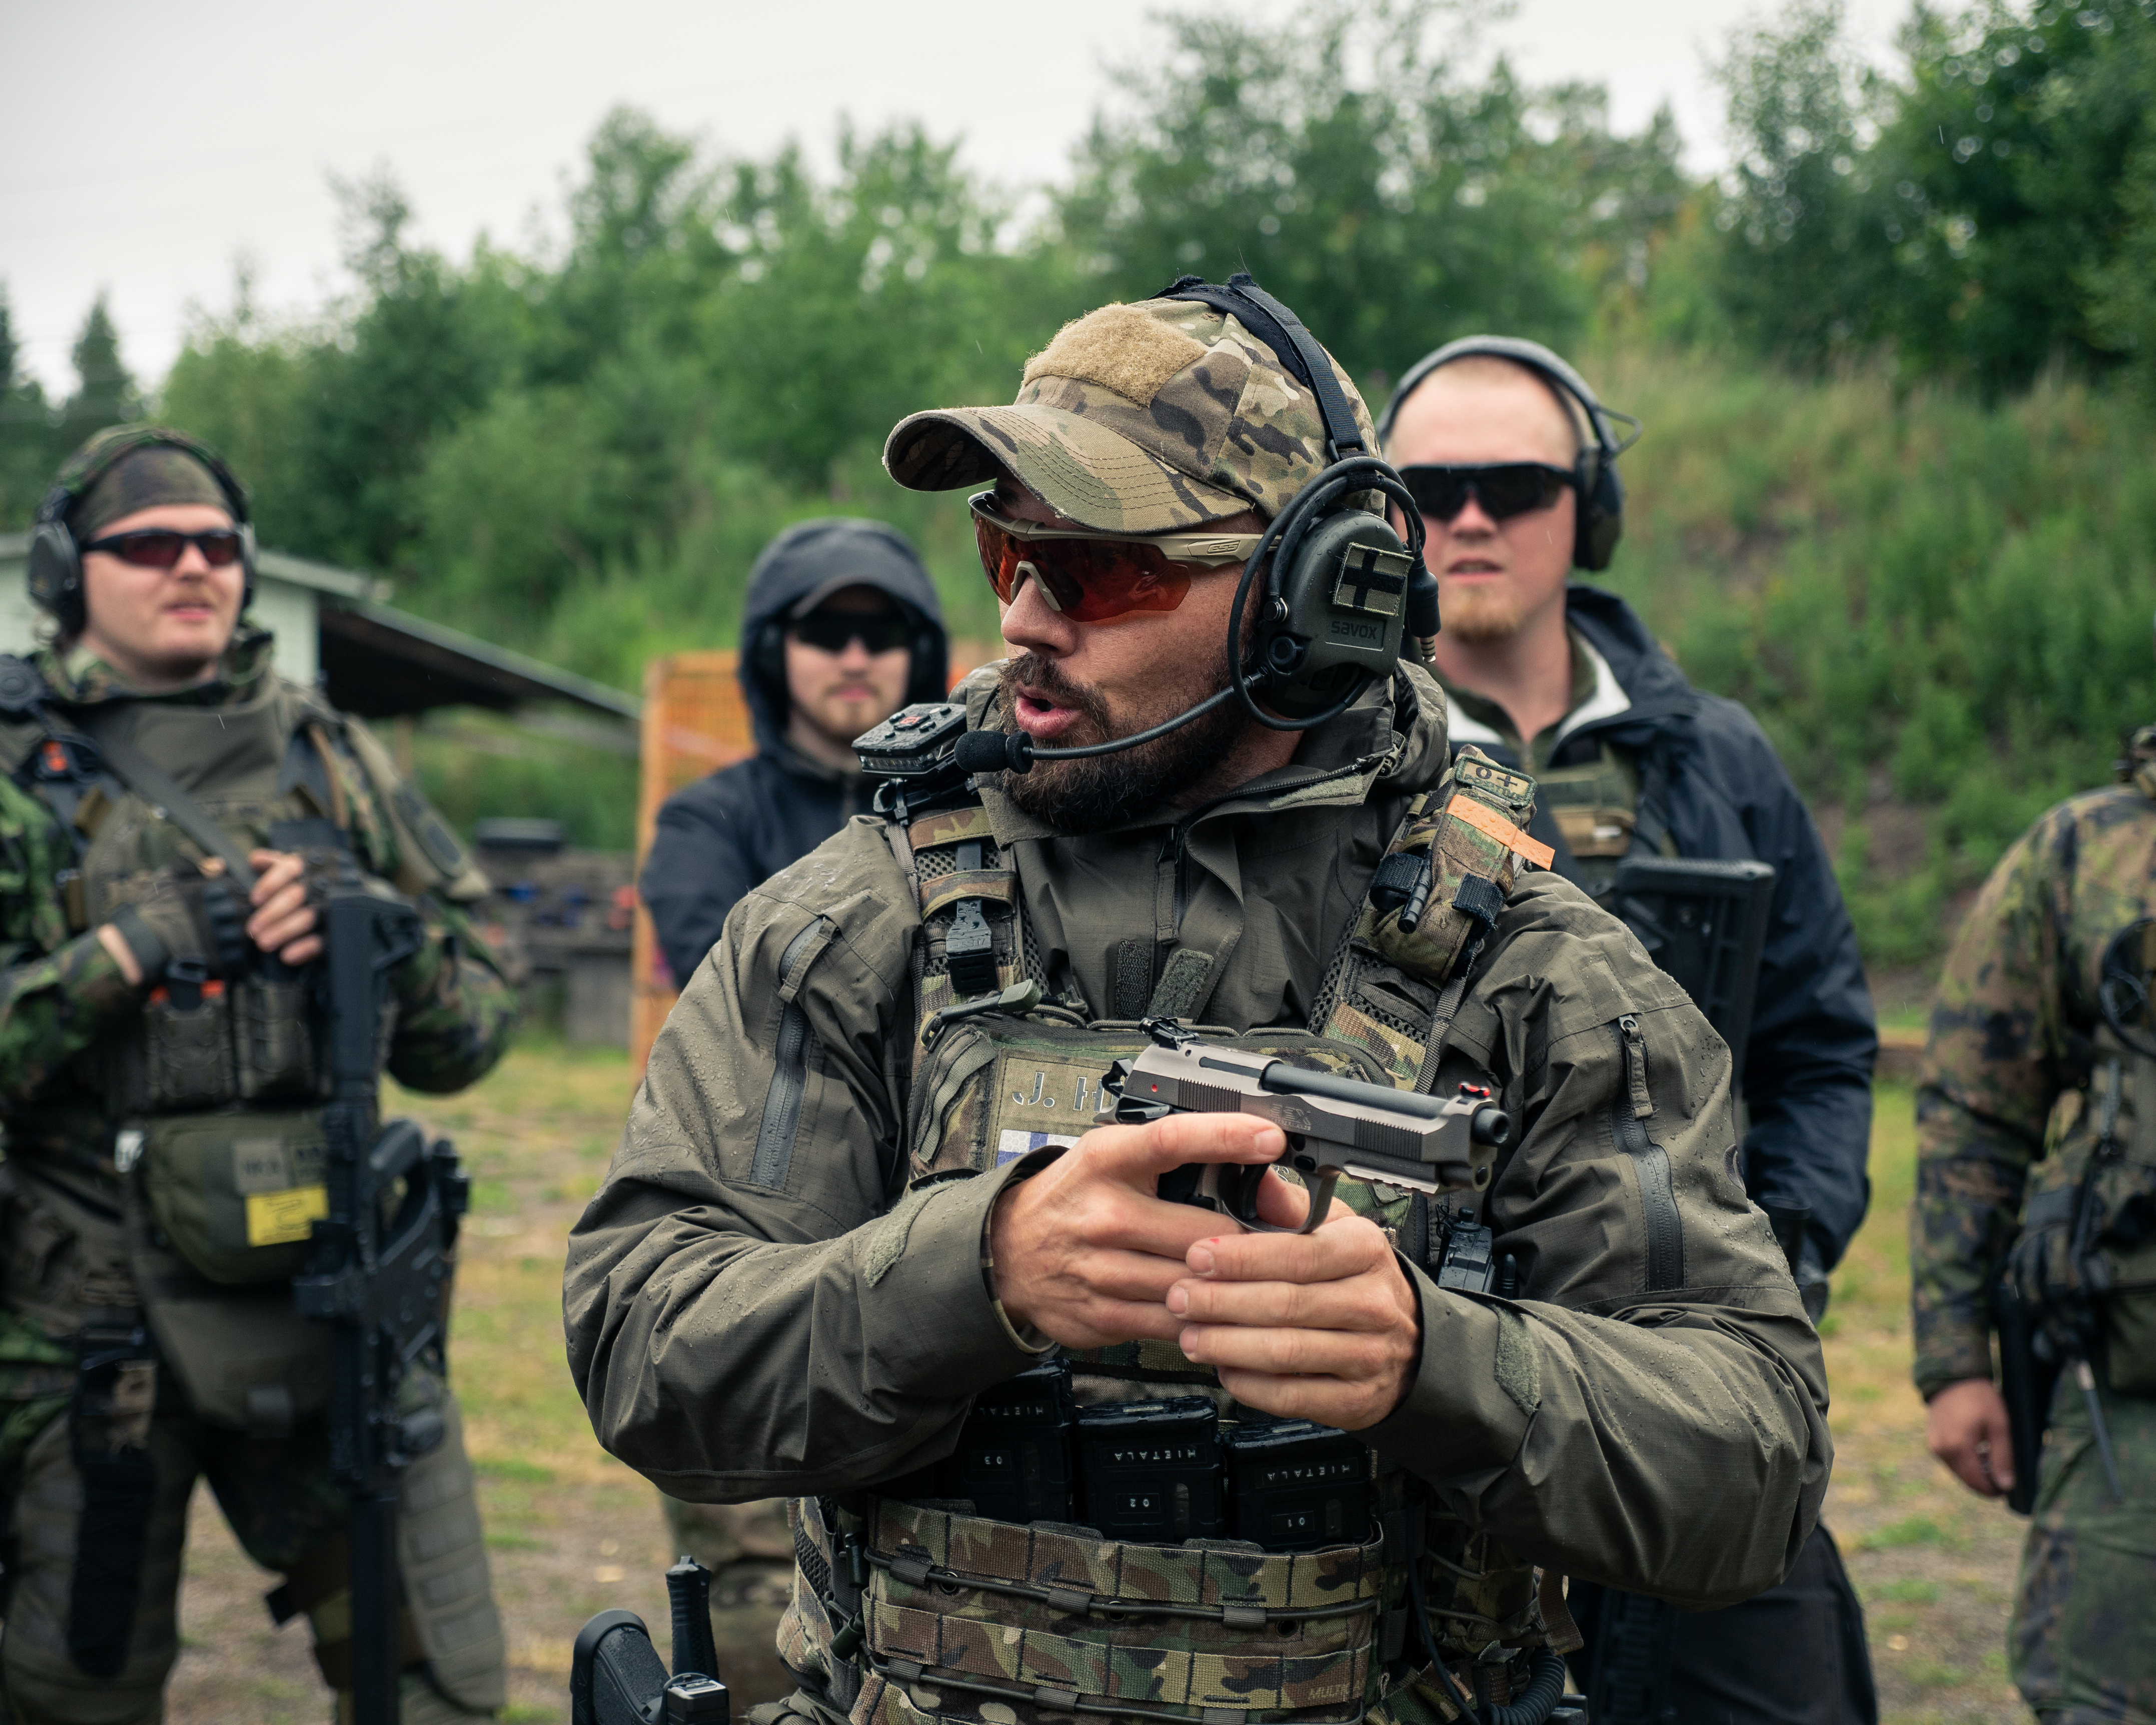 A man Jere Hietala is standing on a shooting range. He is wearing earpro, sunglasses, a cap, jacket and a plate carrier. He has a beard.  He has a pistol. Men are standing around him.